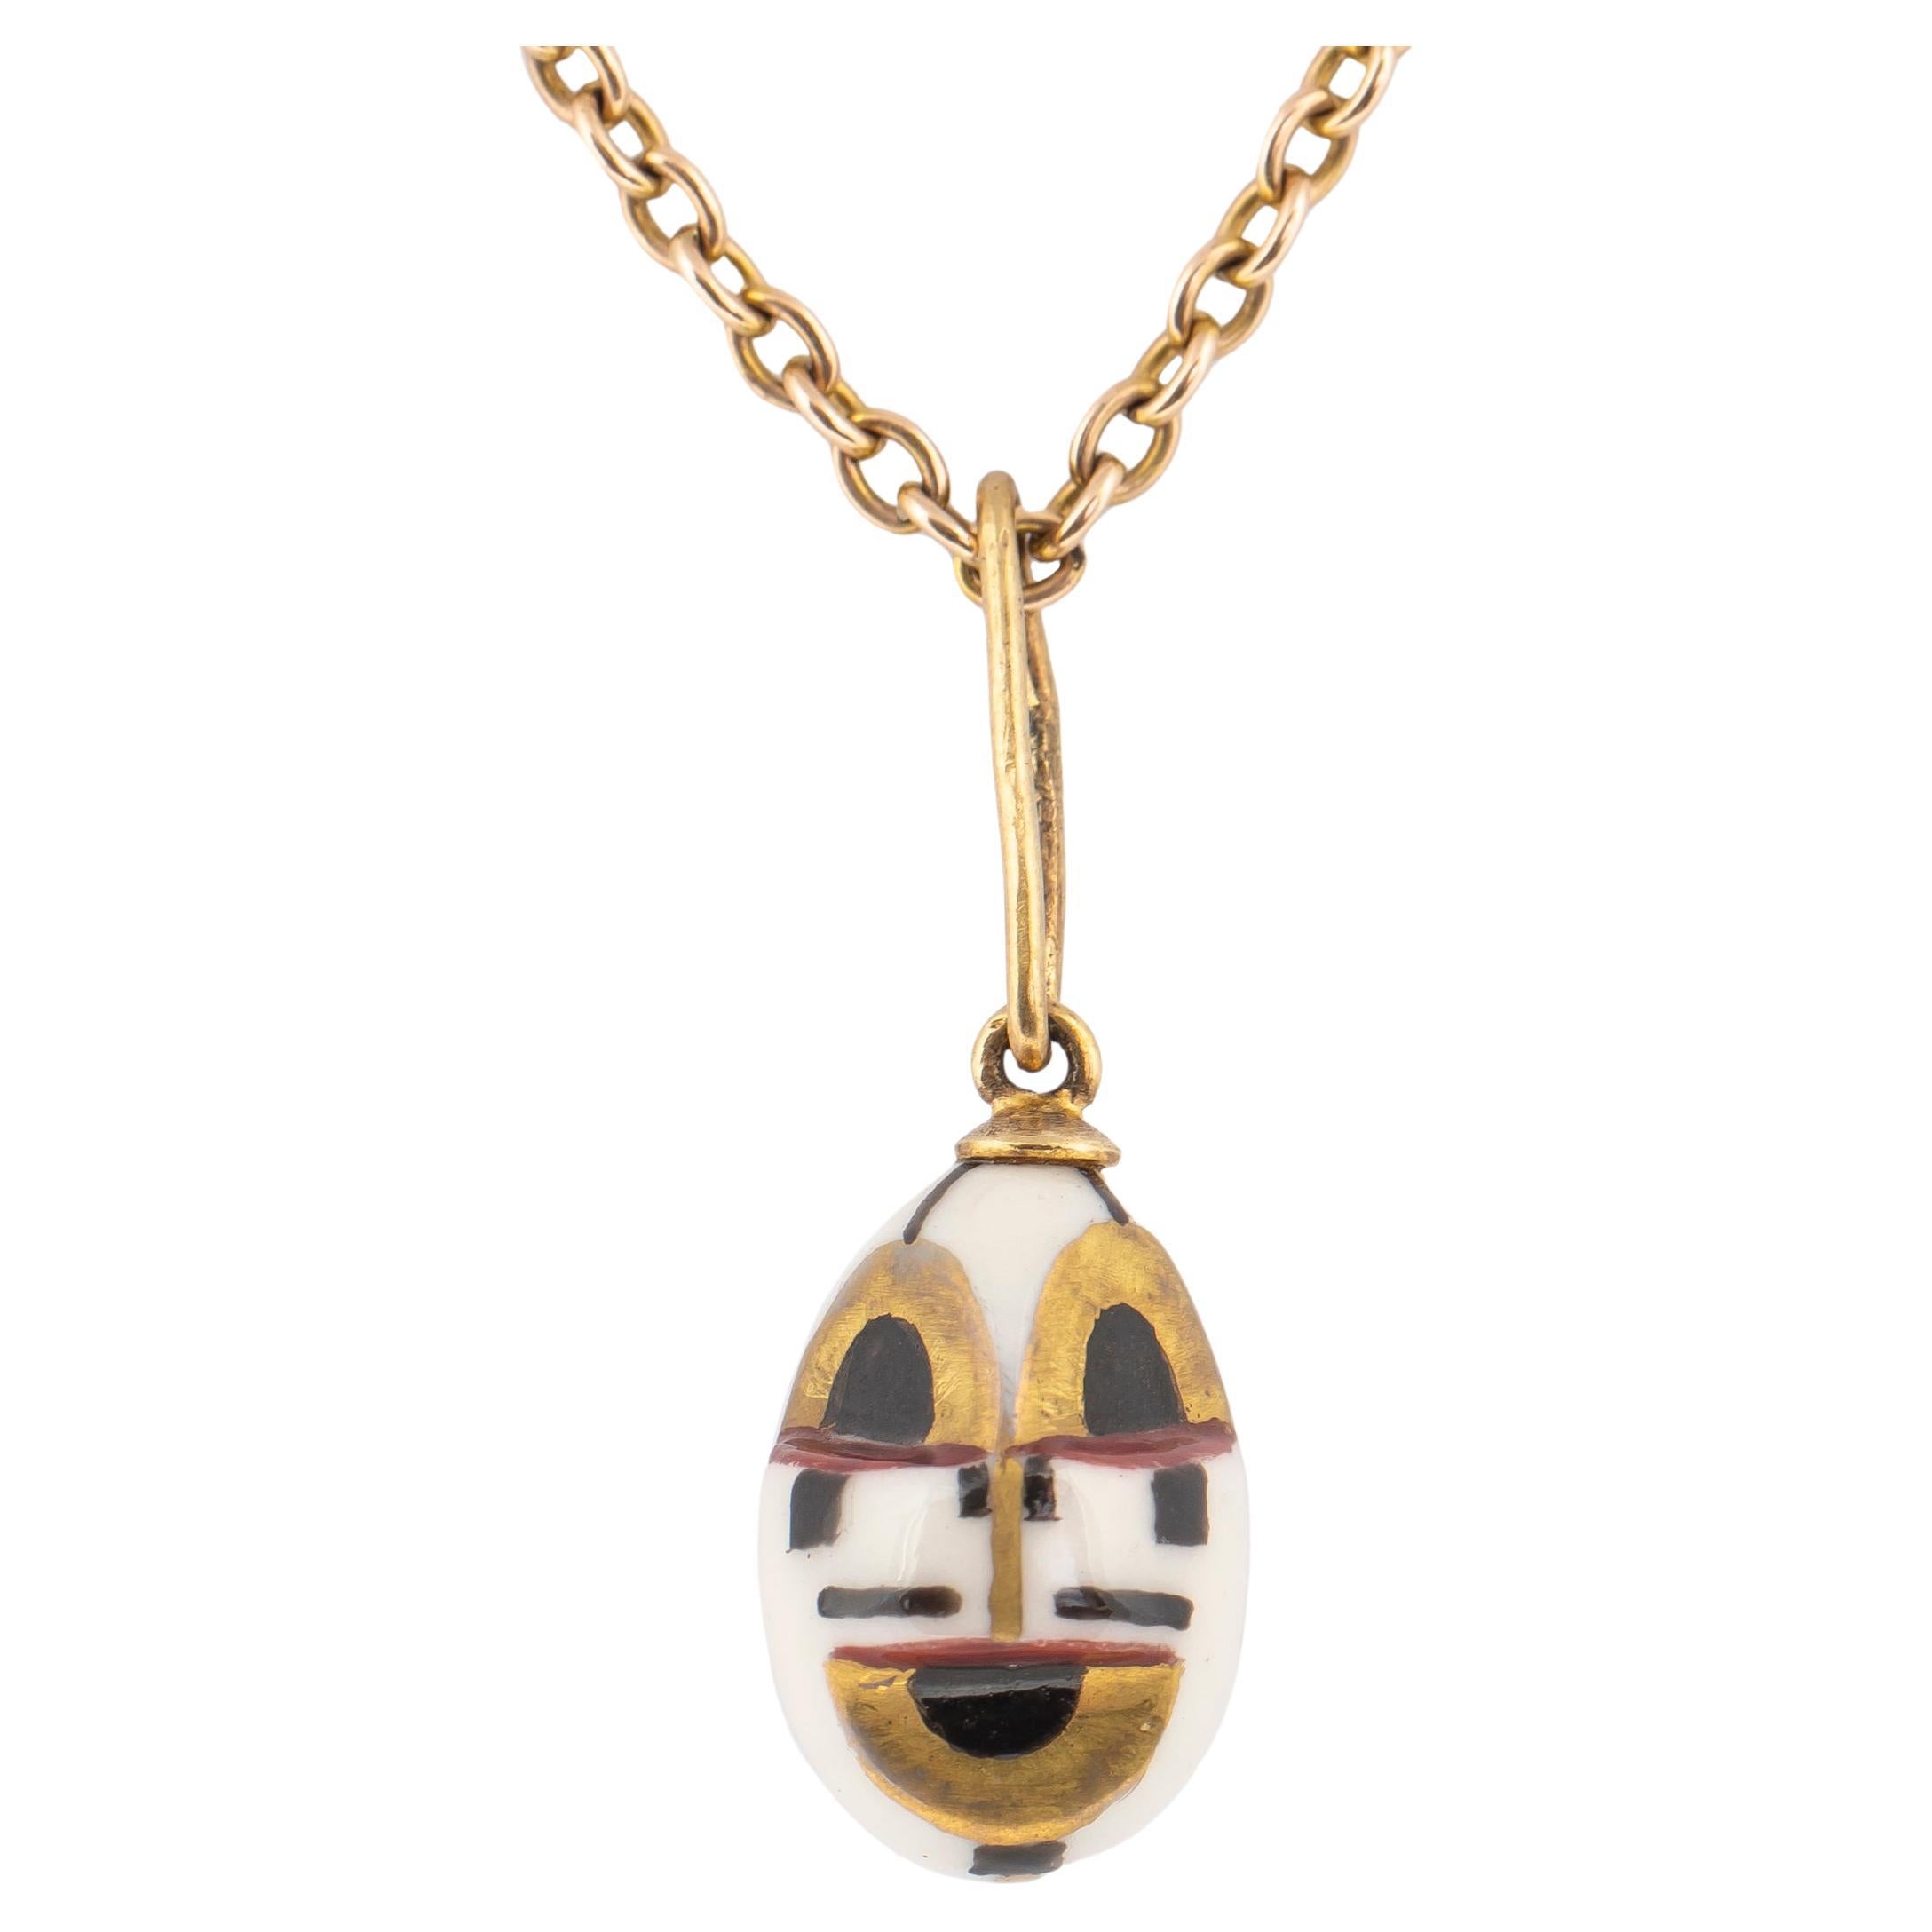 Russian Porcelain Mask Miniature Egg Pendant, Style of Malevich, 21st Century